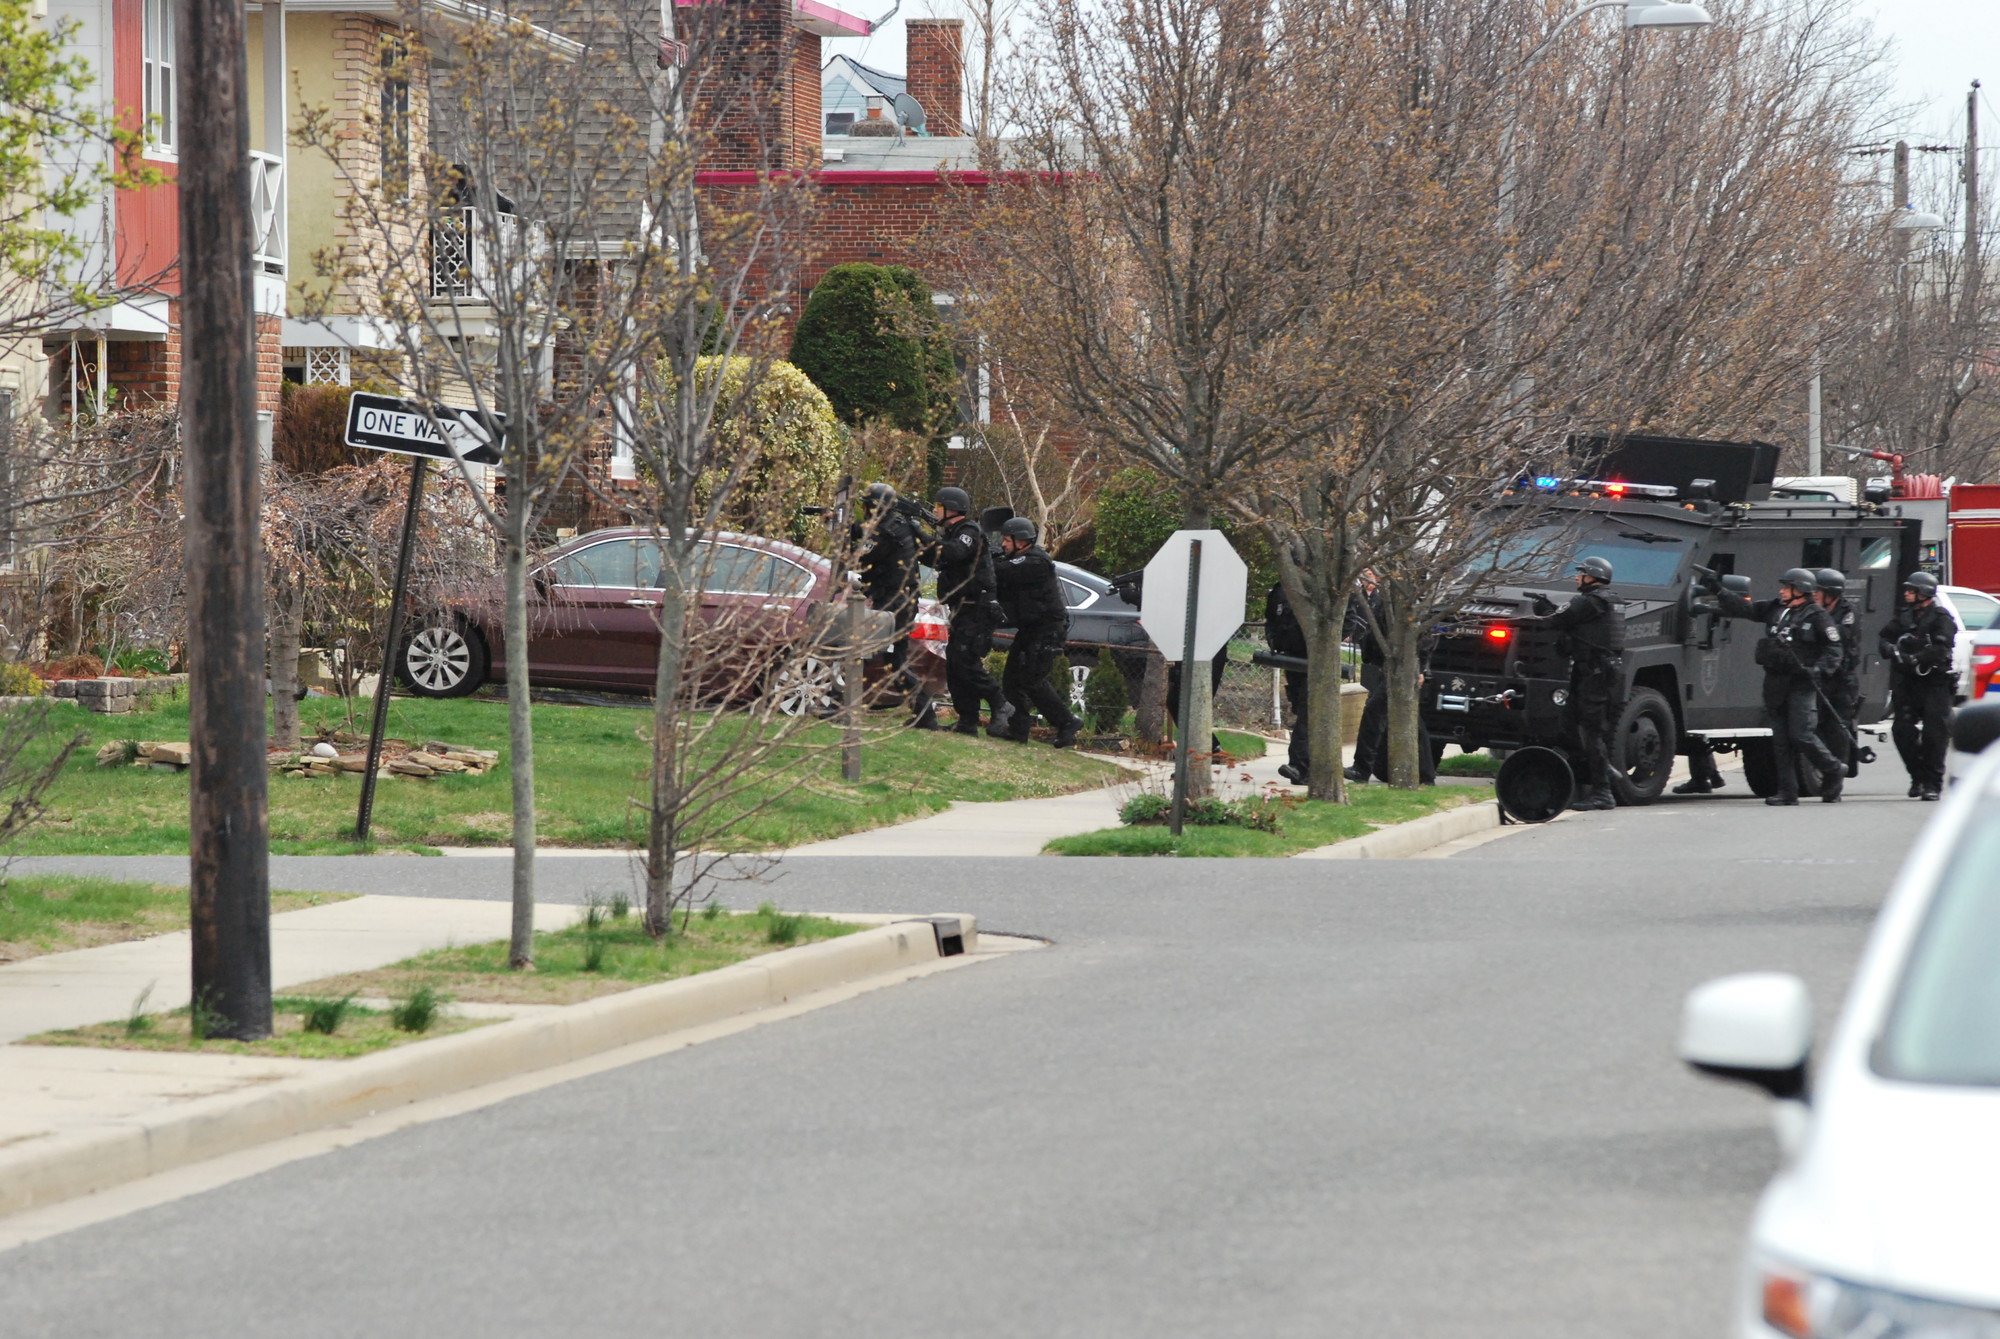 The SWAT team entered the home to conduct a search after the family was safely removed.